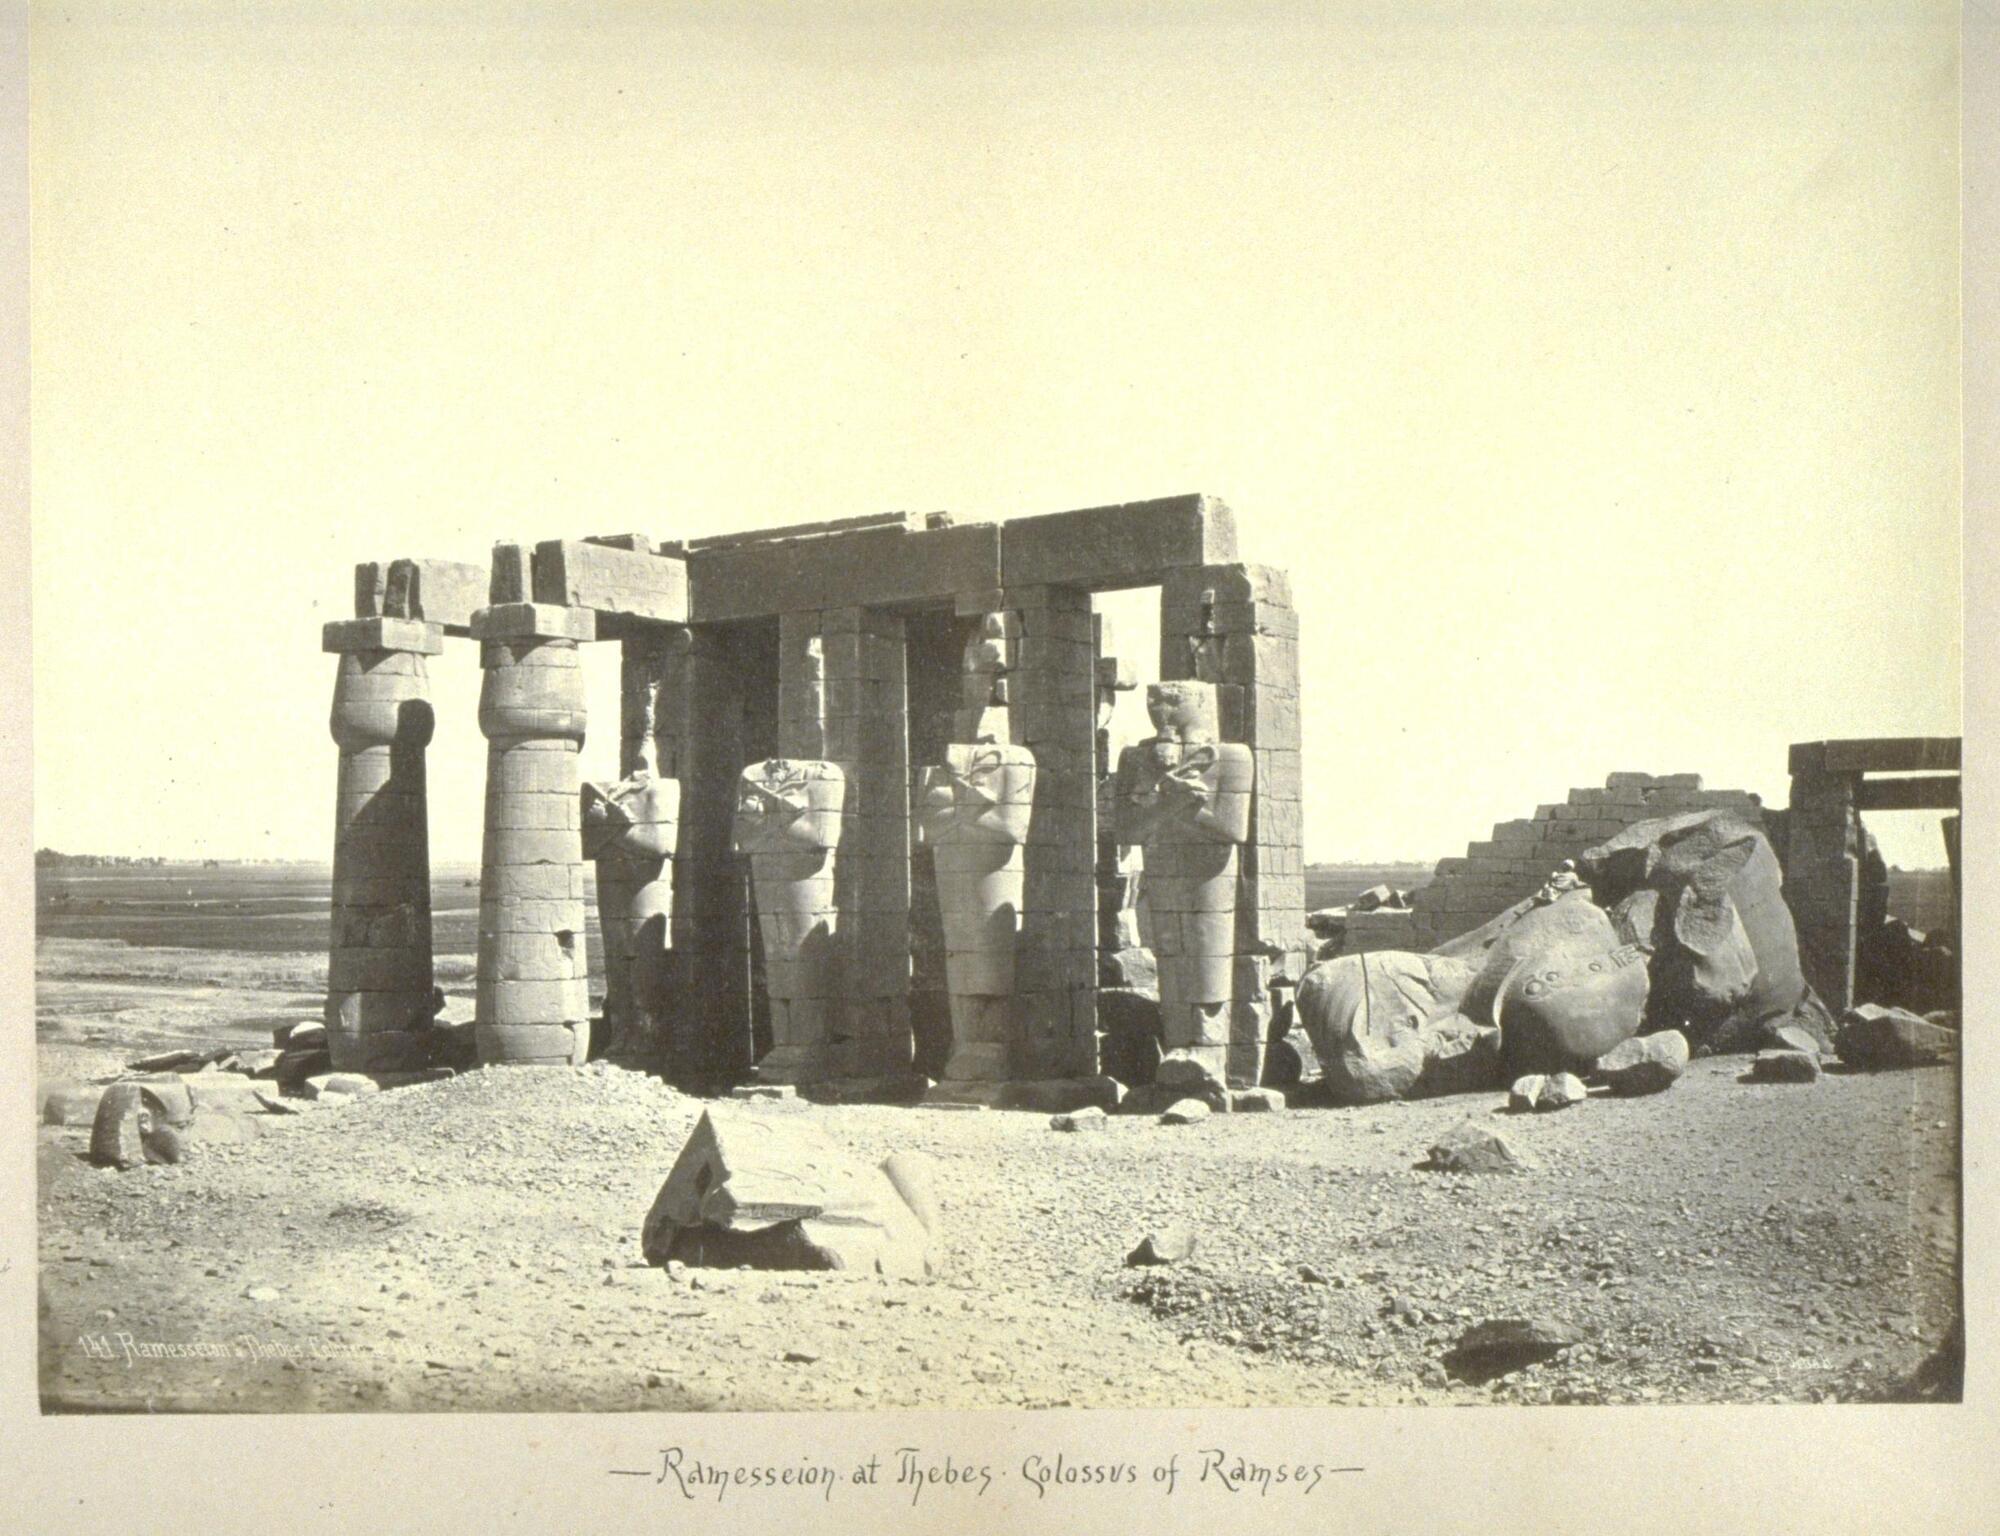 A grouping of columns and figural sculptures stands amid other ruins and stone debris in a mostly flat, rocky landscape. 